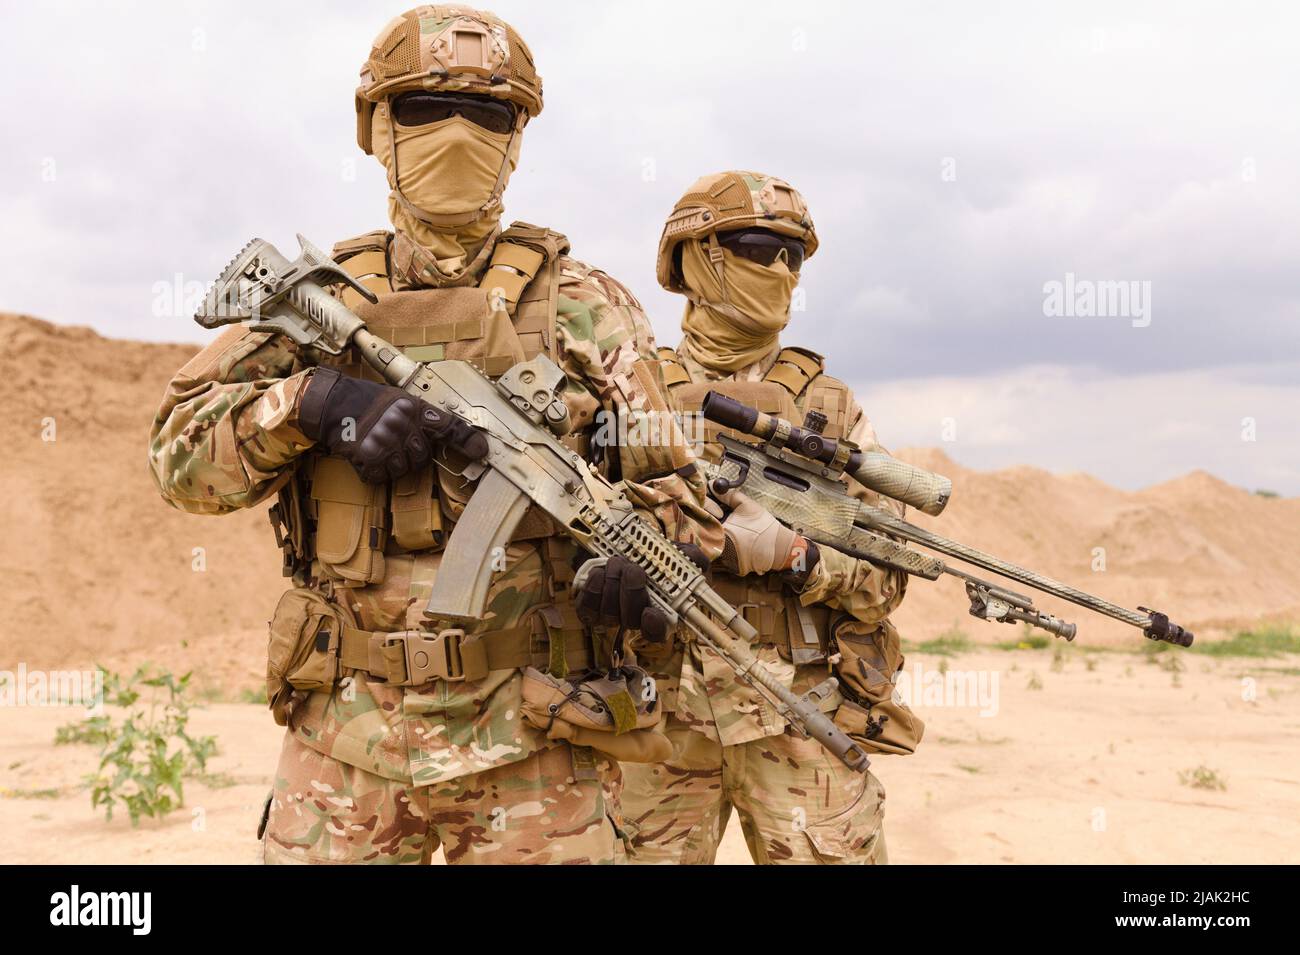 Two equipped and armed special forces soldiers standing in the desert. Stock Photo